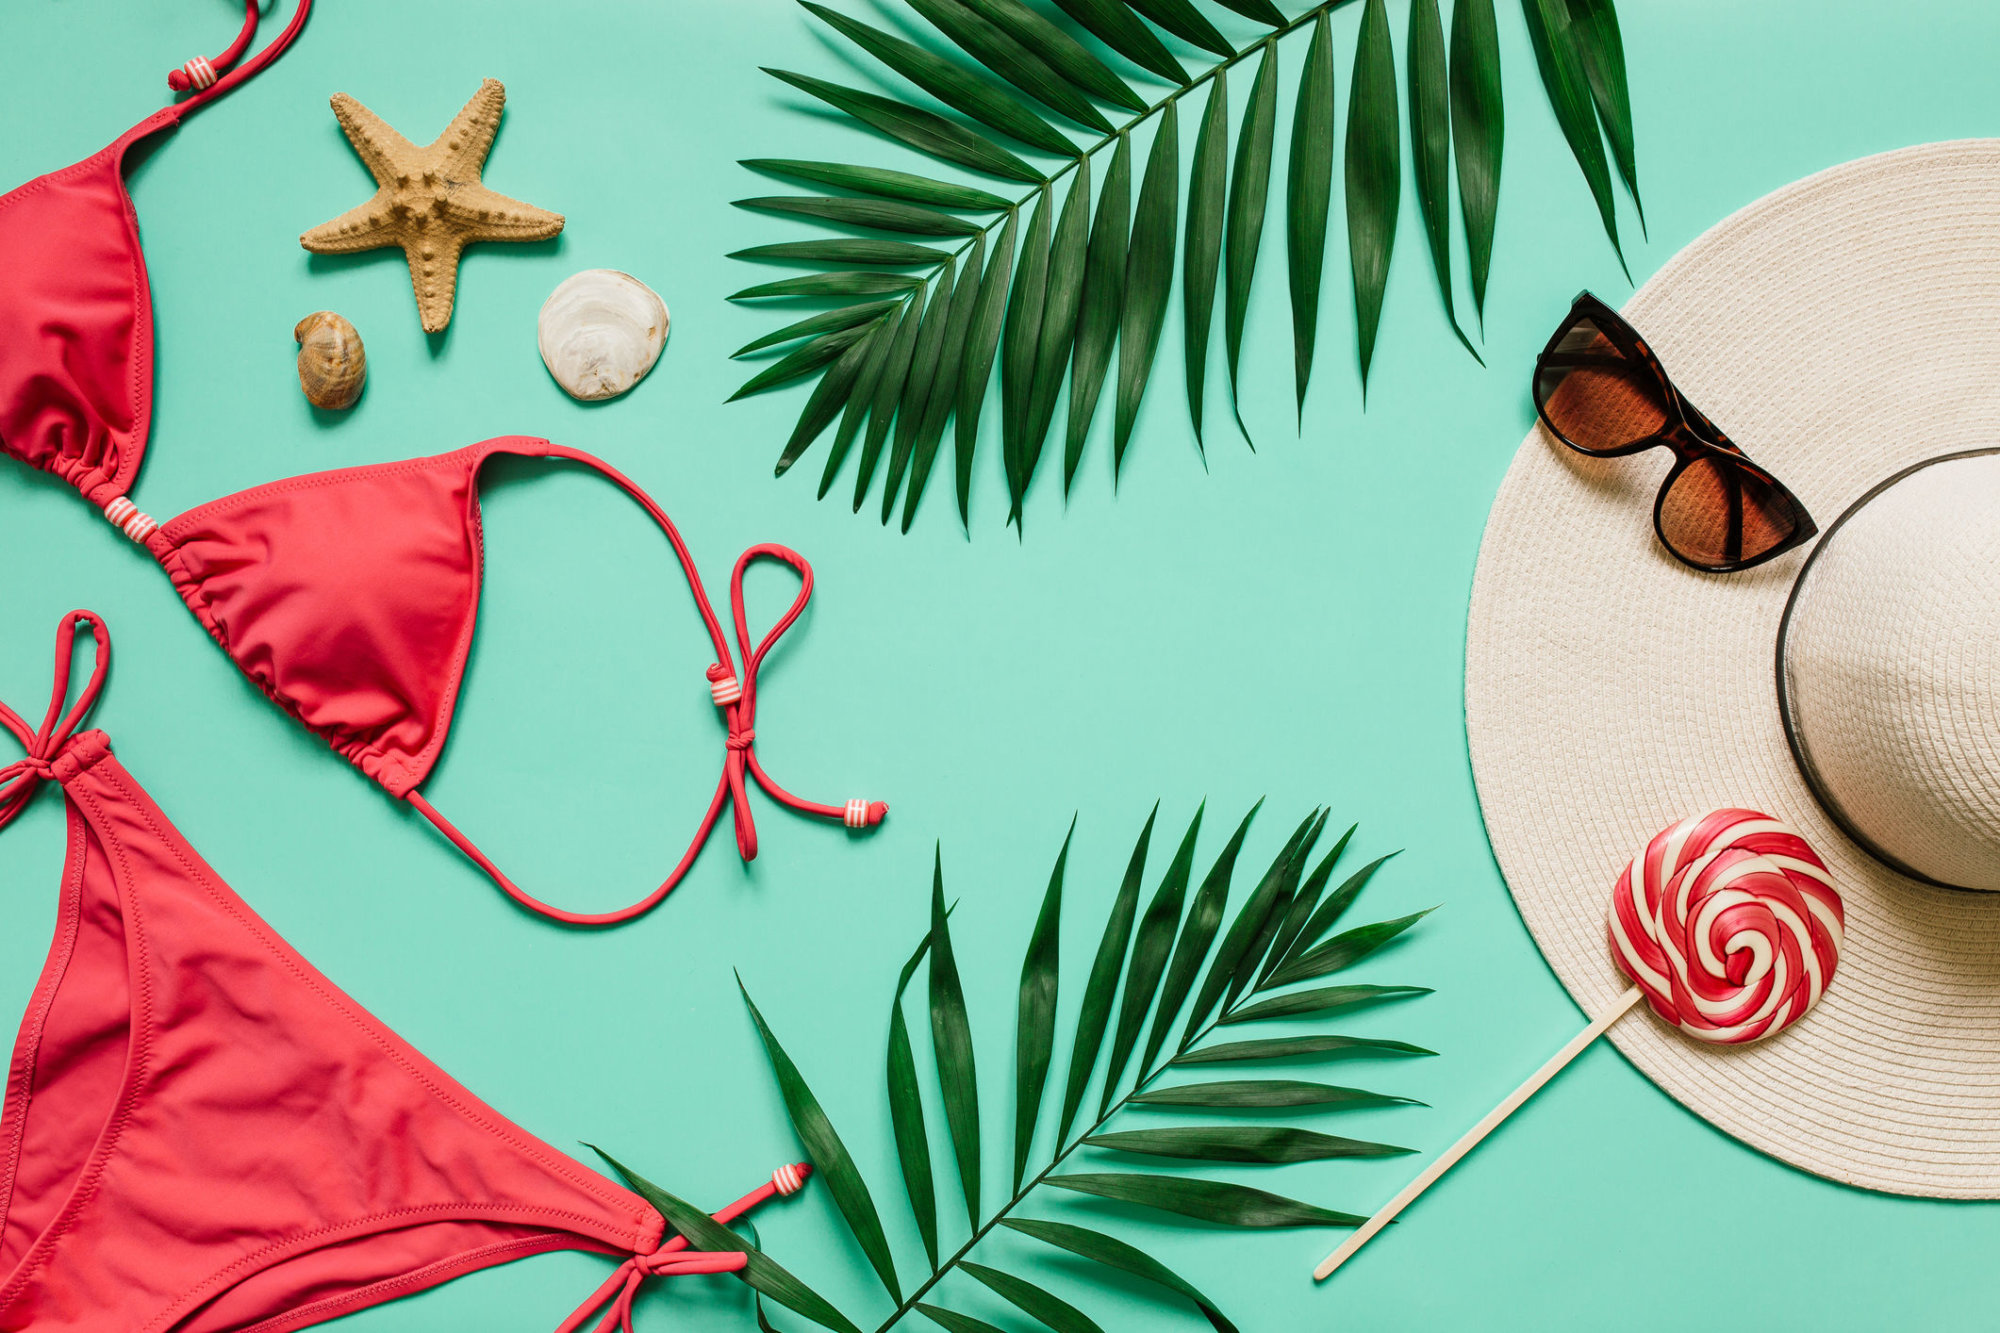 Red, pink bikini suit, lollipop, sunglasses, sea star on plain light cyan background. Empty space for copy, text, lettering. Summer vacation concept.